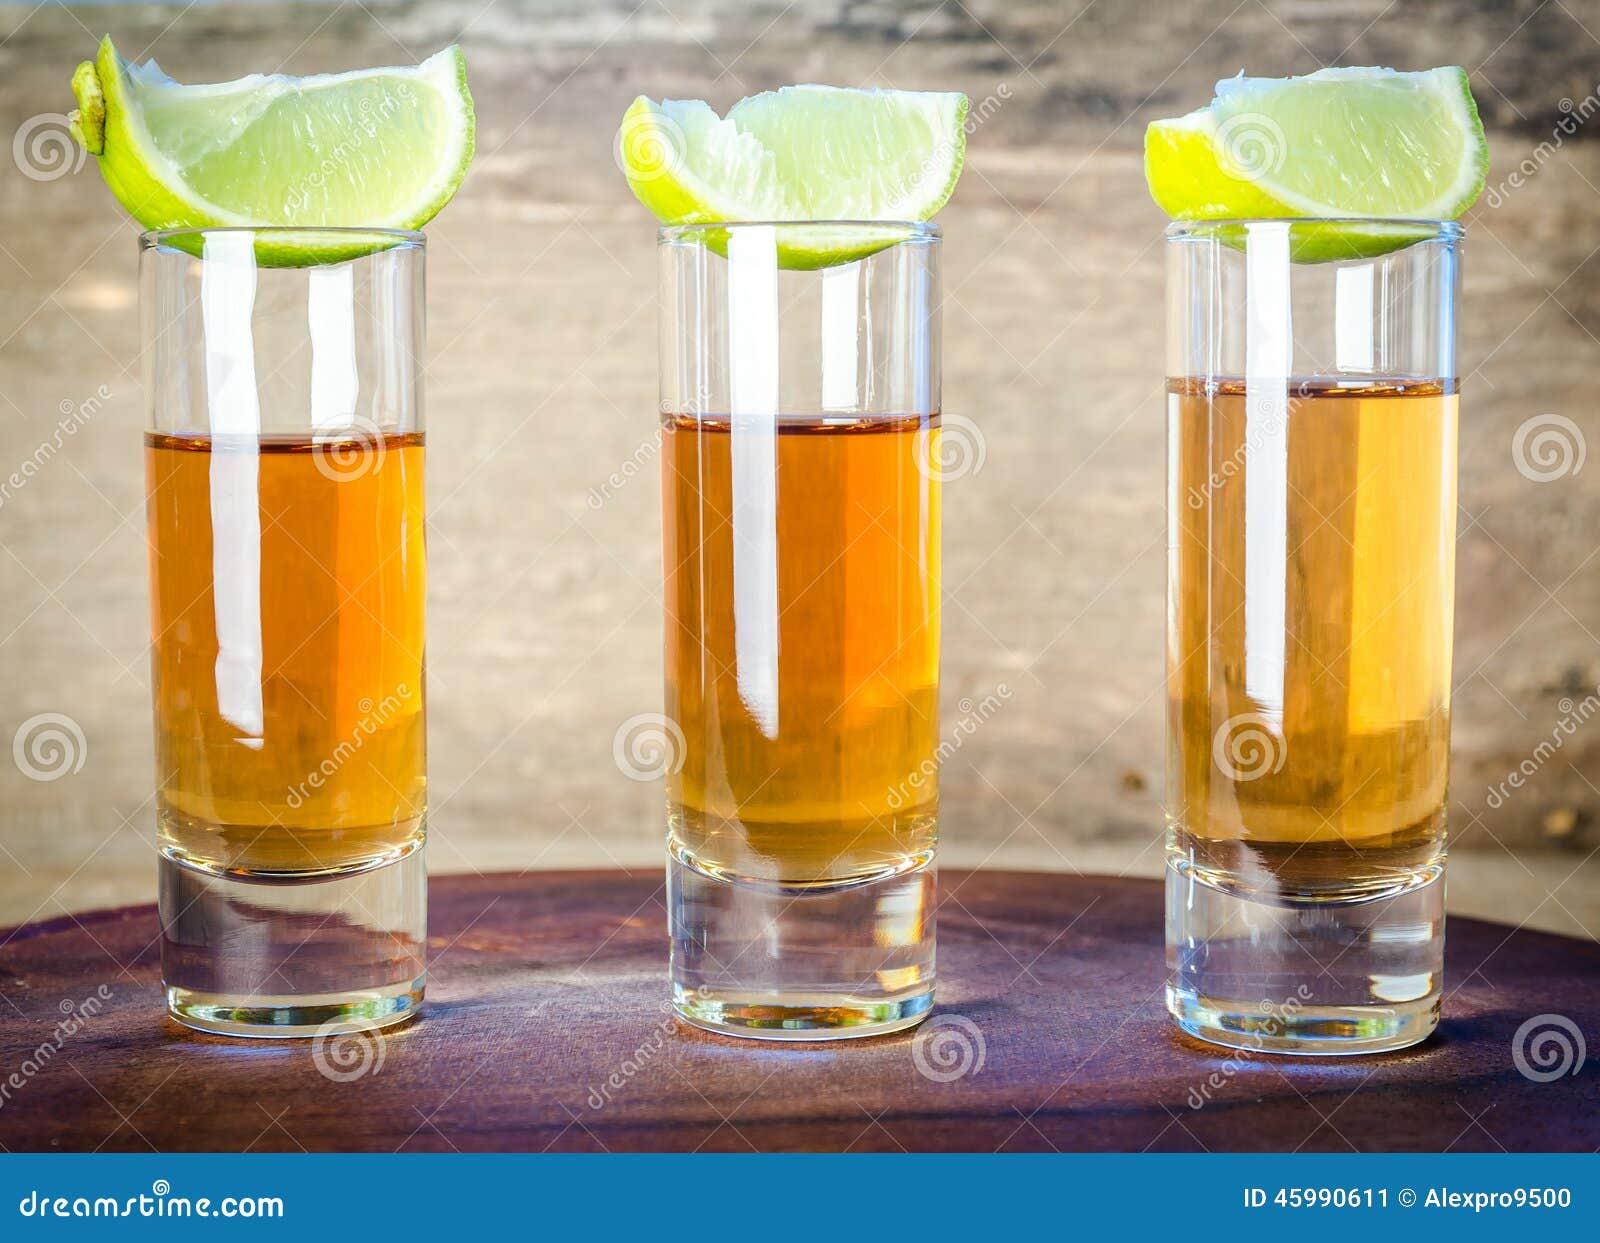 glasses of tequila on the wooden board